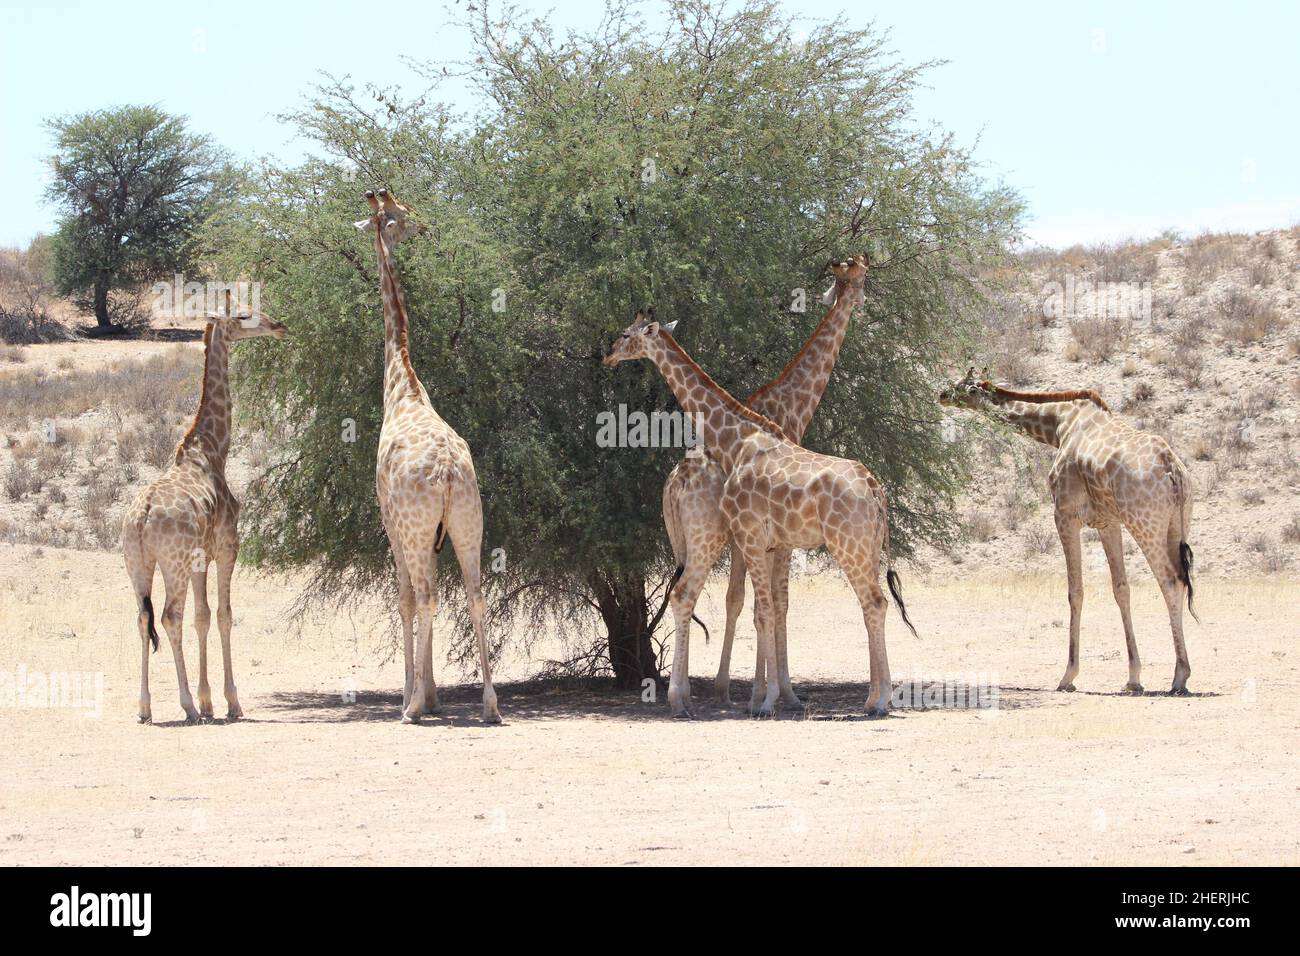 Group of giraffe eating from a tree in the Kgalagadi Stock Photo